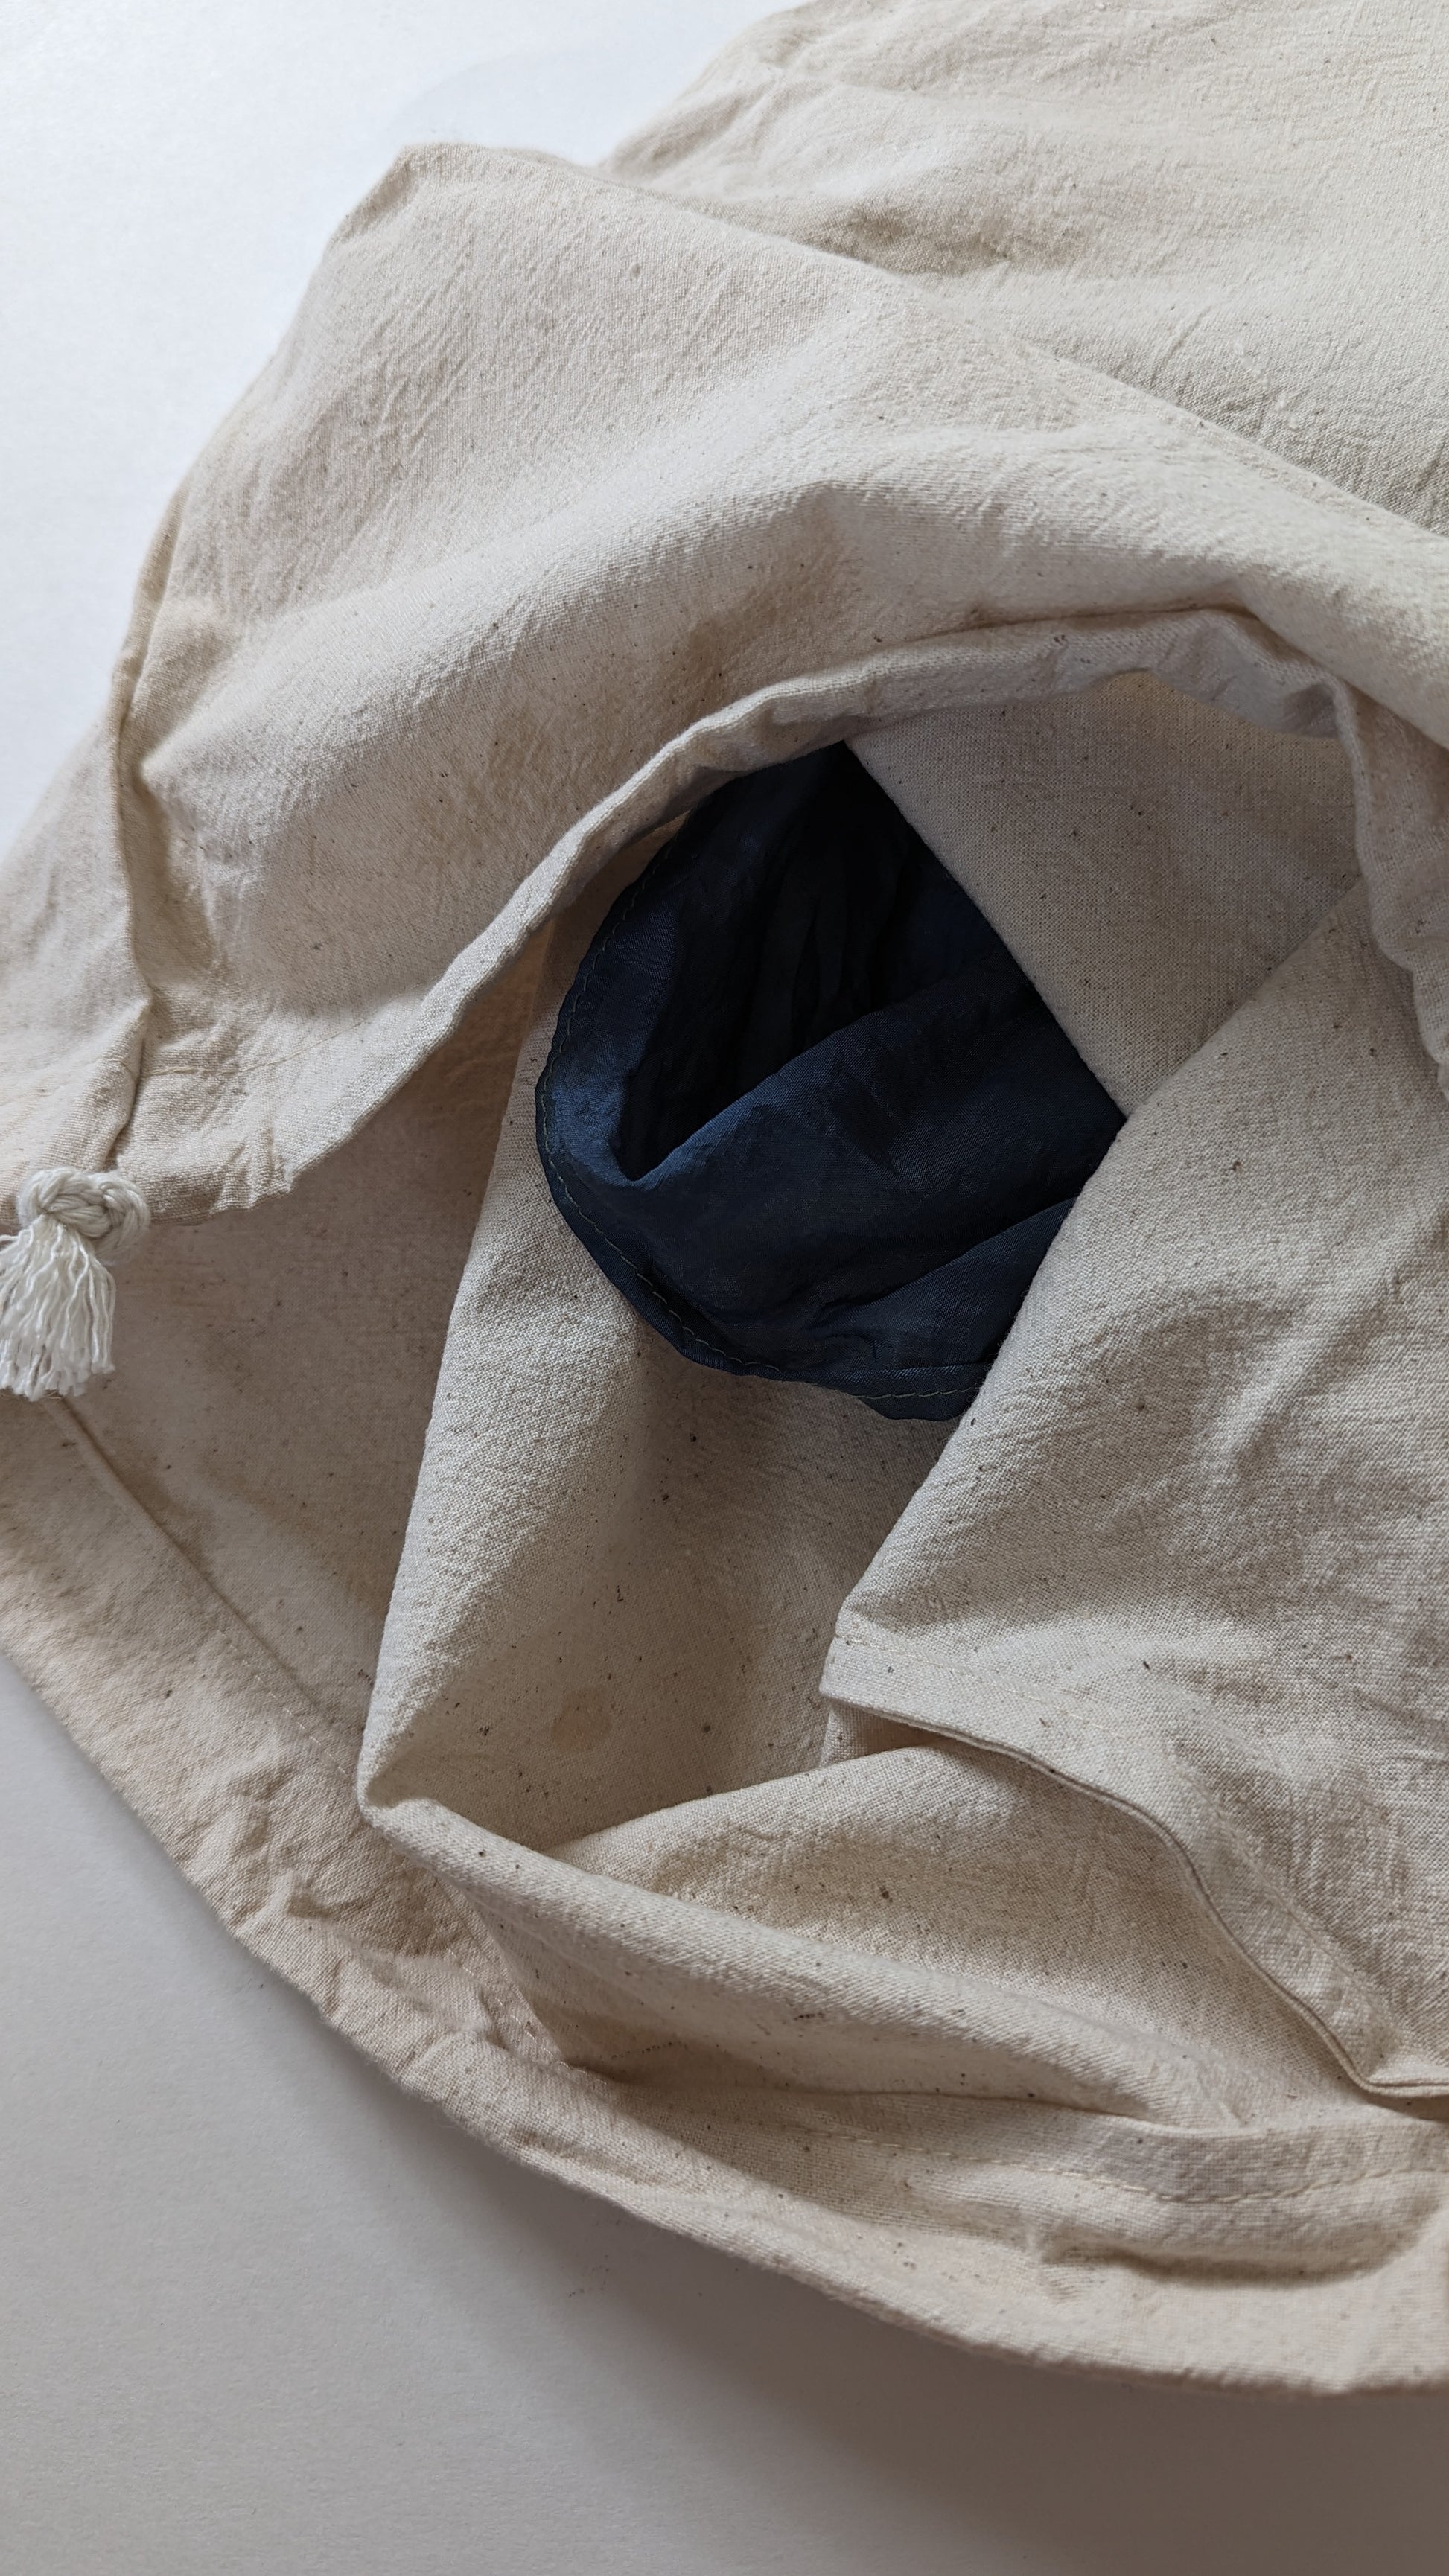 The Wash Bag - Organic Cotton Washable Drawstring Bag by Connally Goods